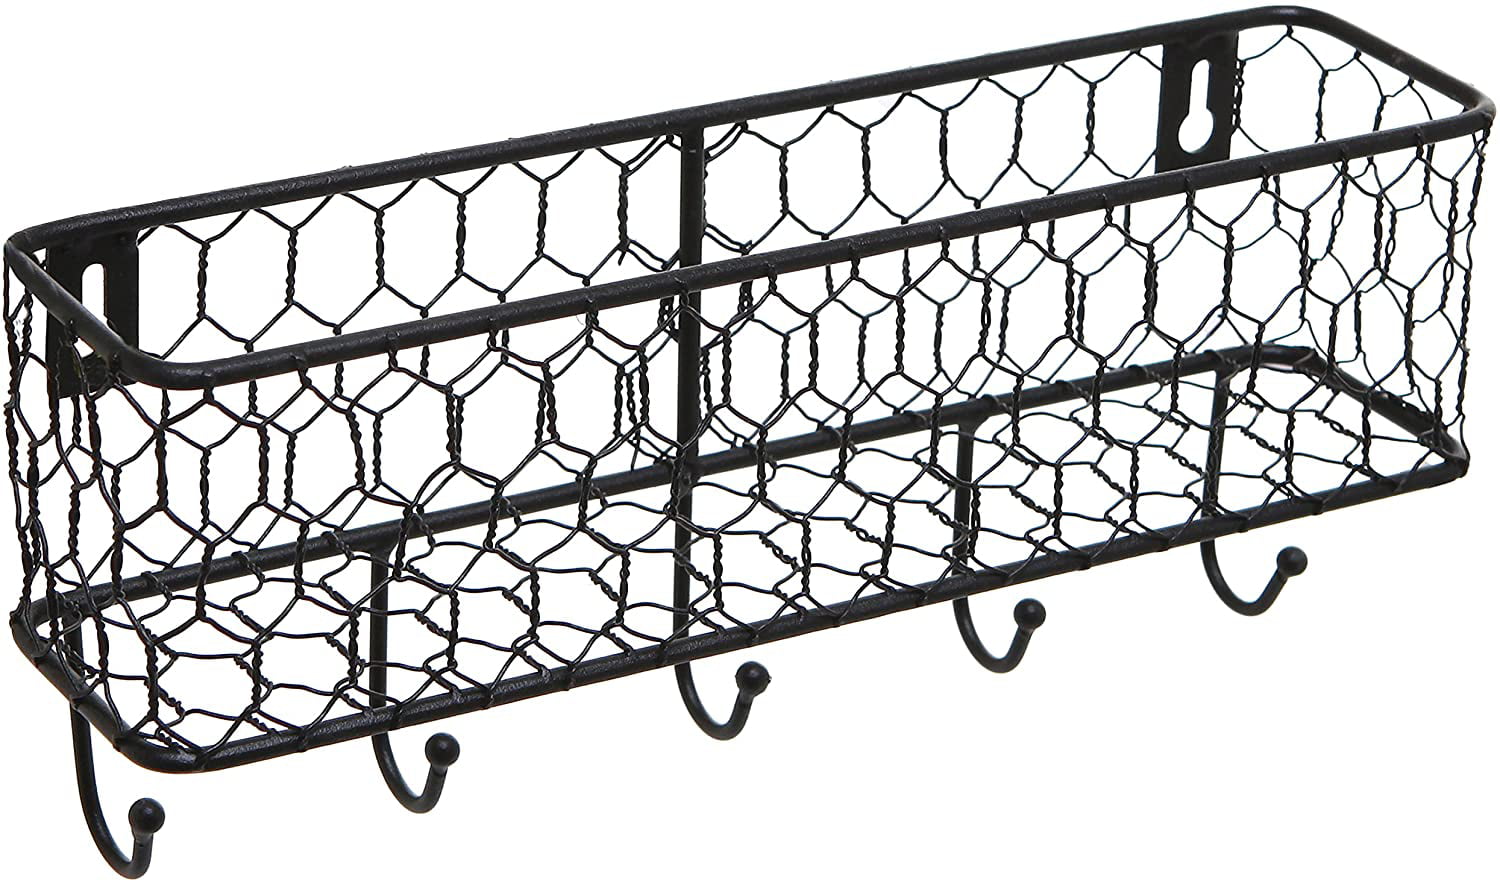 MyGift 3 Slot Black Metal Wire Wall Mounted Mail Organizer Rack with 5 Key Hooks 